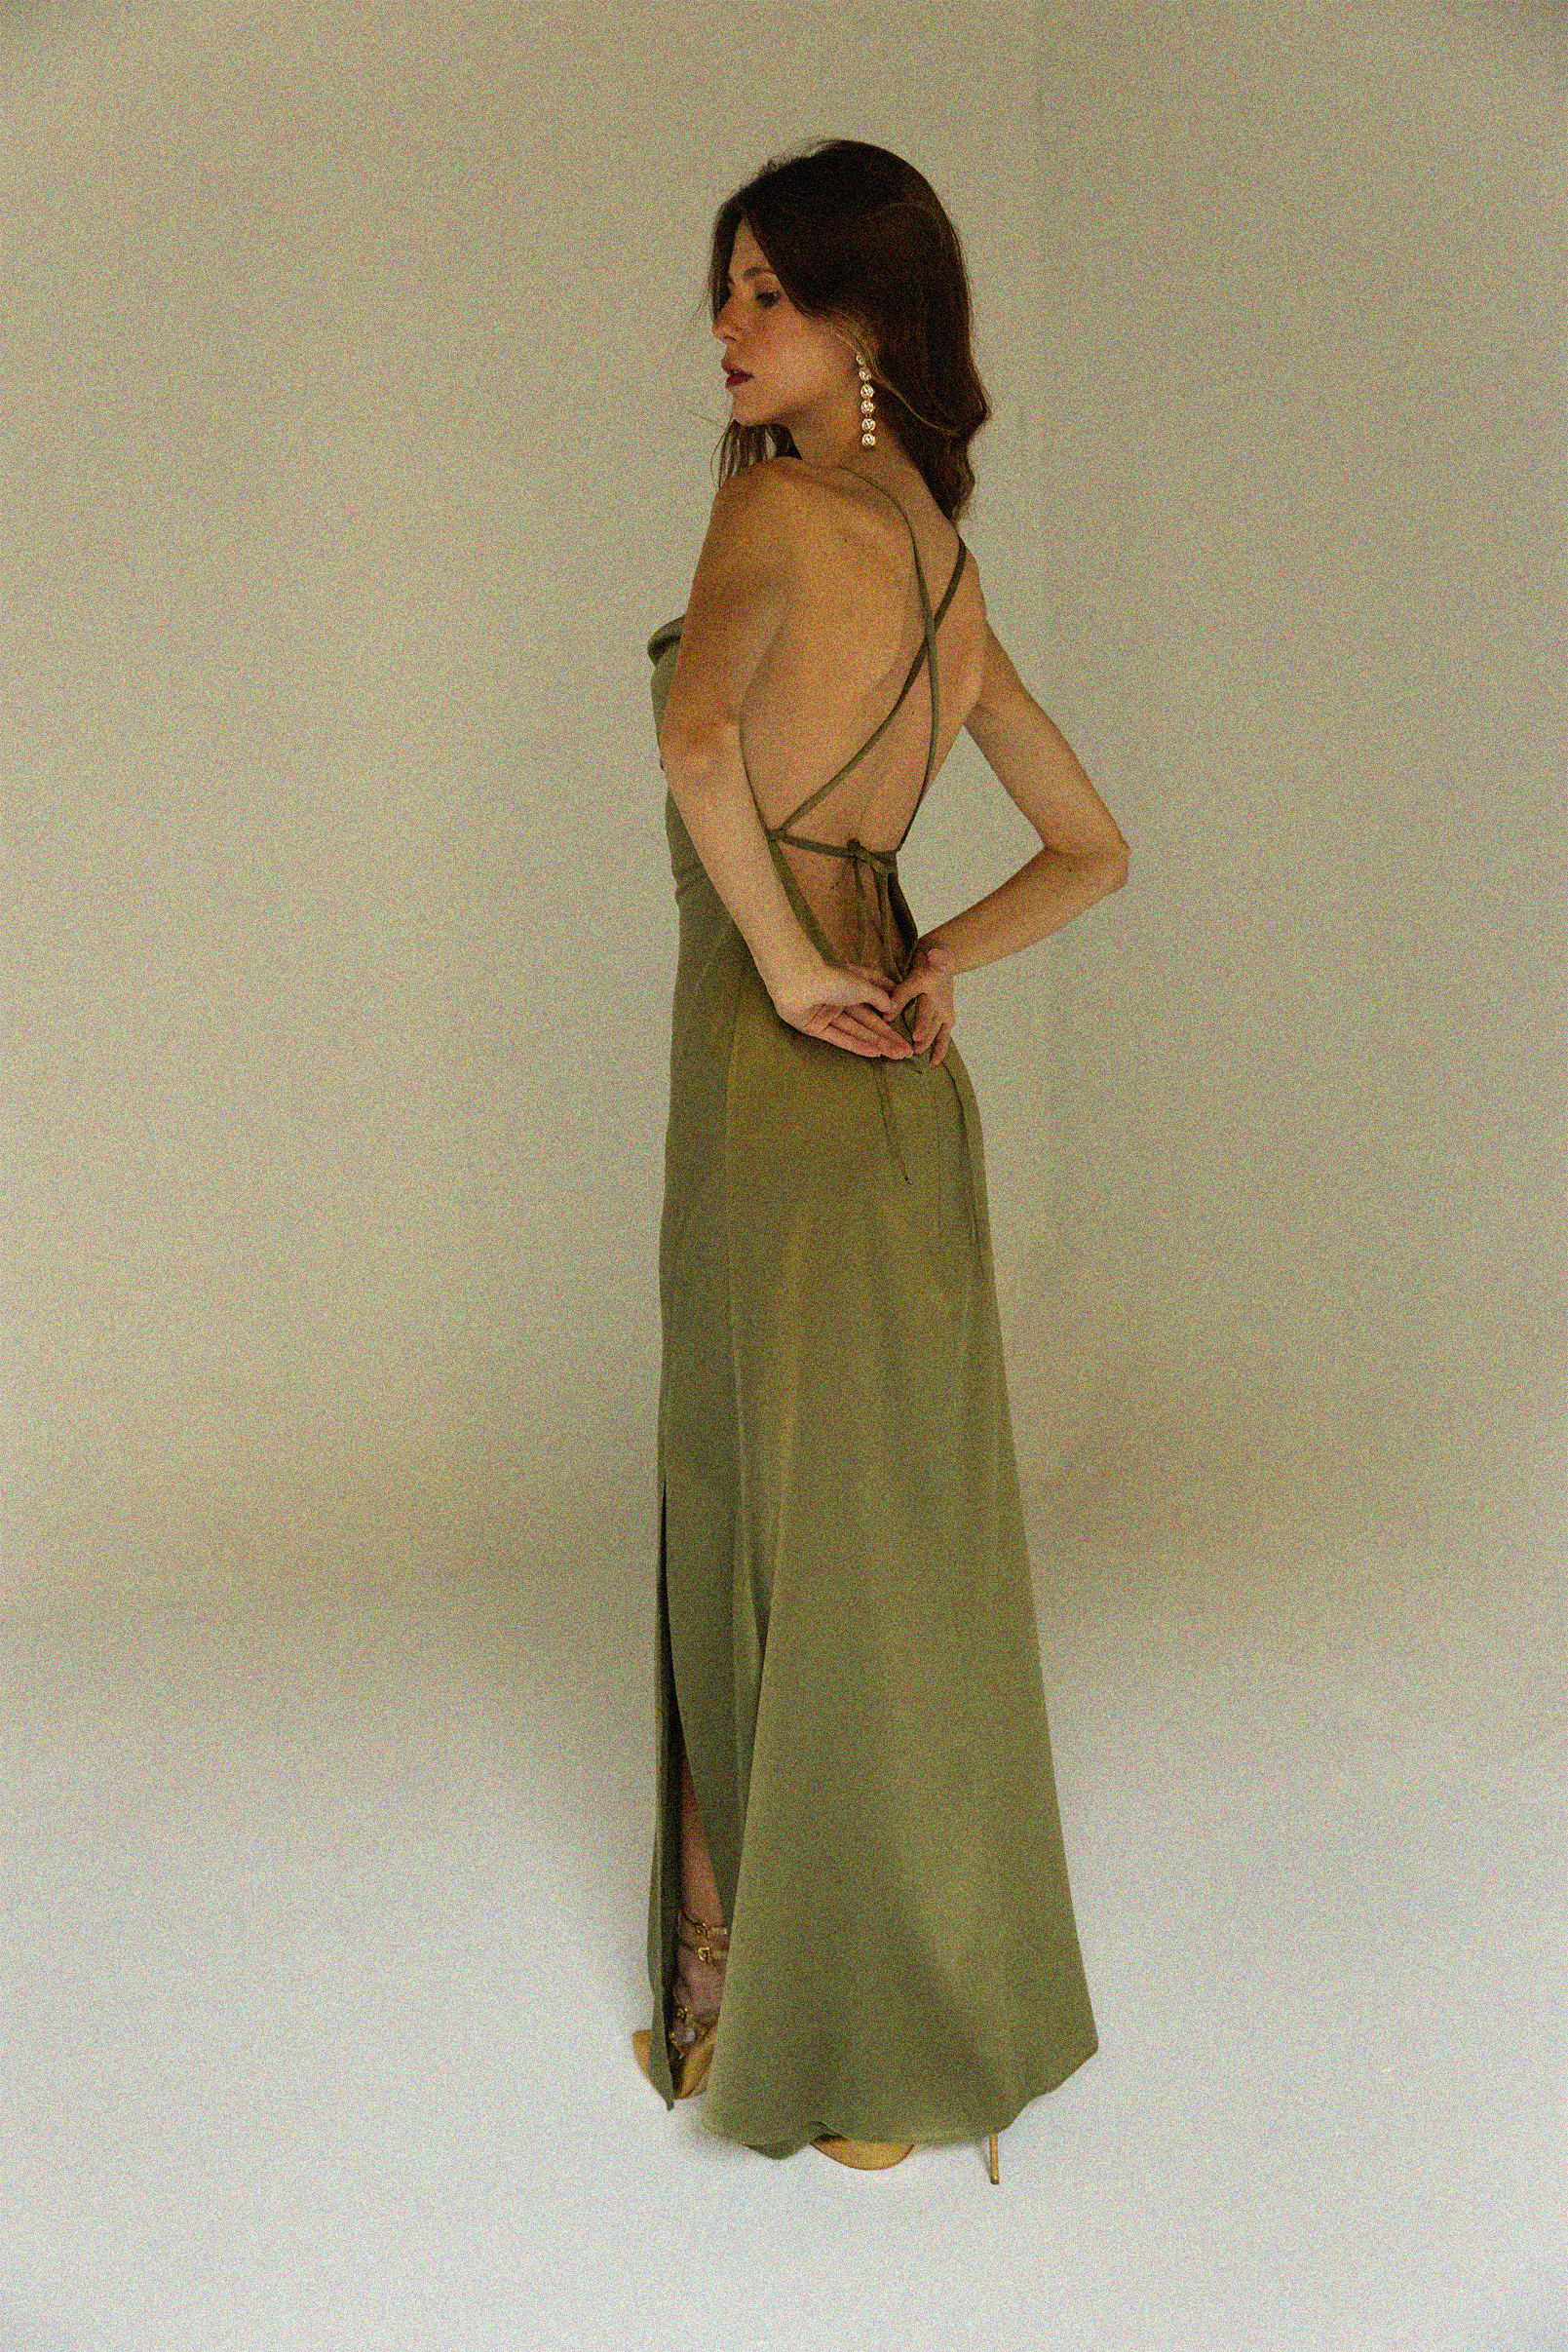 The Backless Satin in Olive